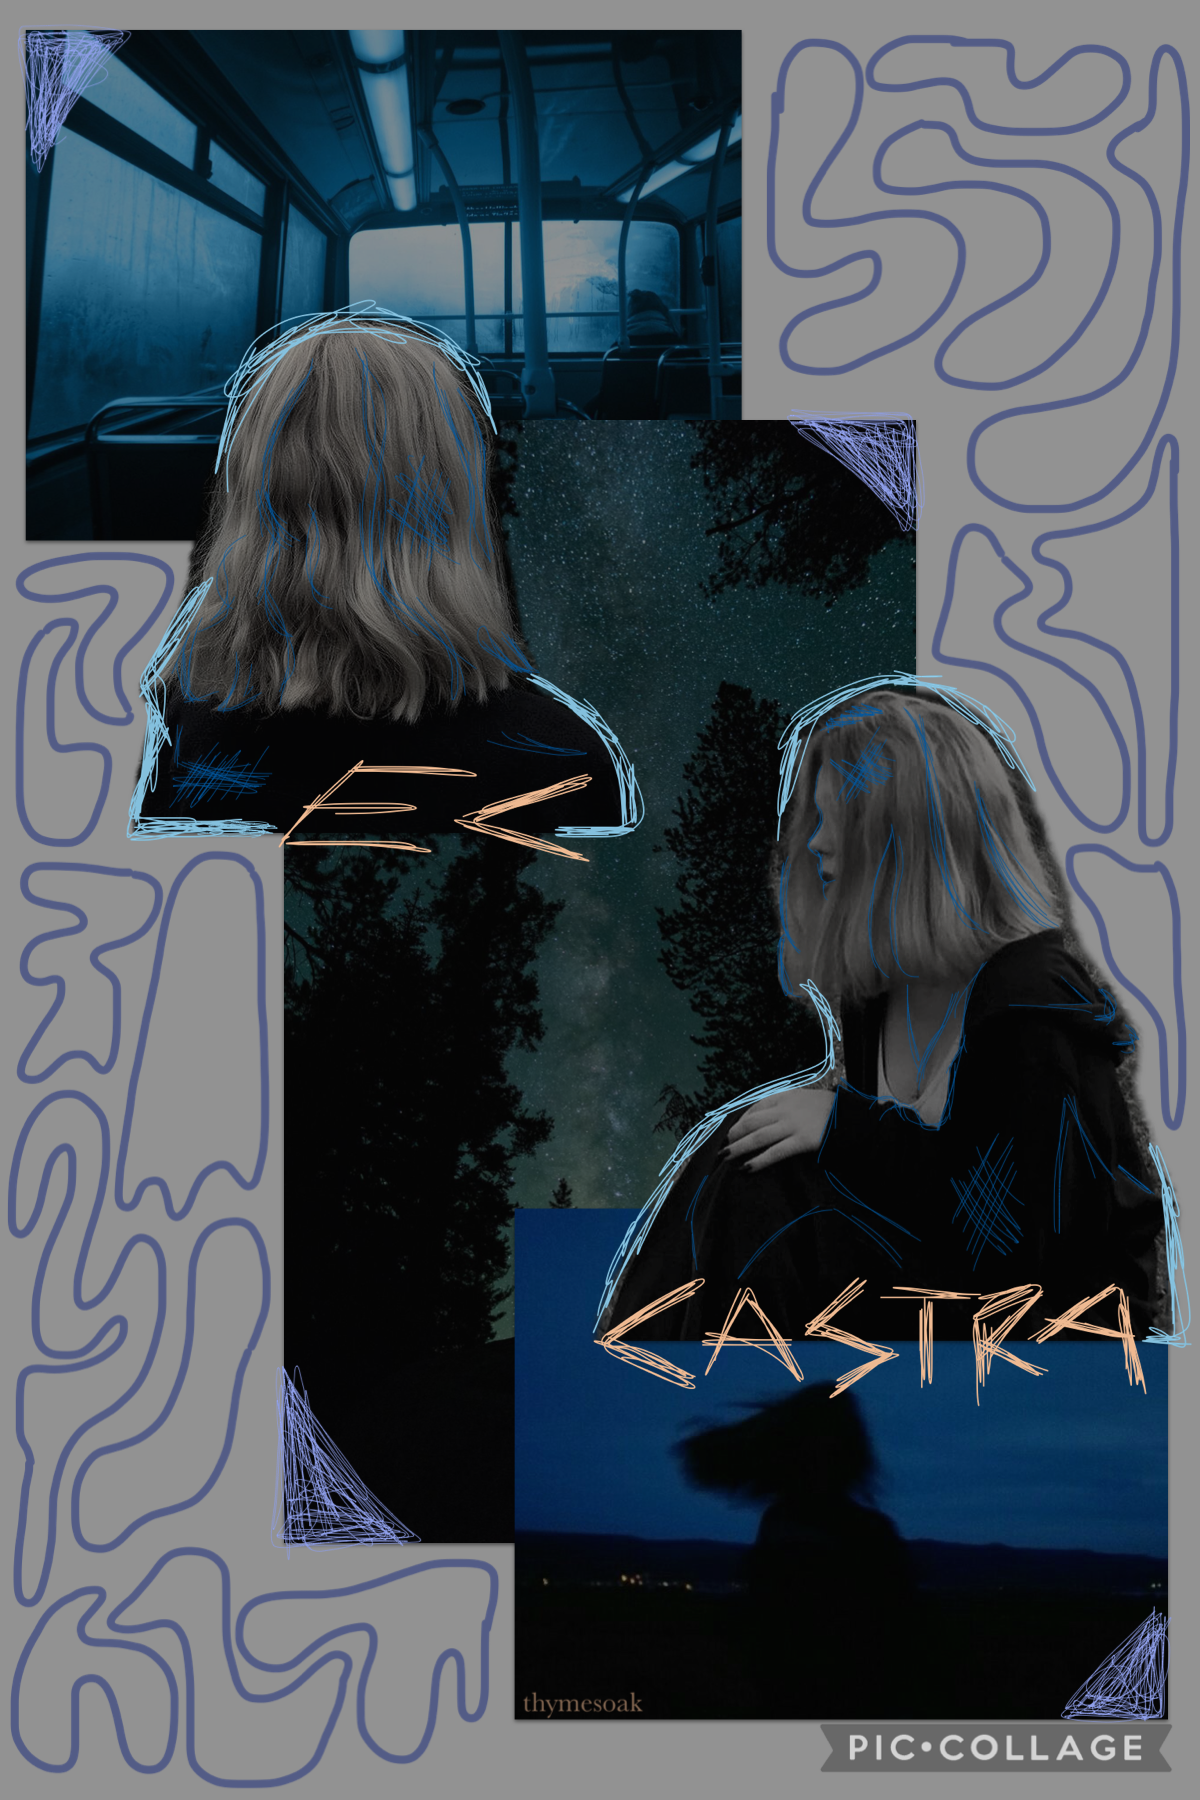 +}{+

12/11/22-8:25pm

Wow hello 💀 just a doodle based Castra collage, more stuff I’ll talk abt in comments

-keira